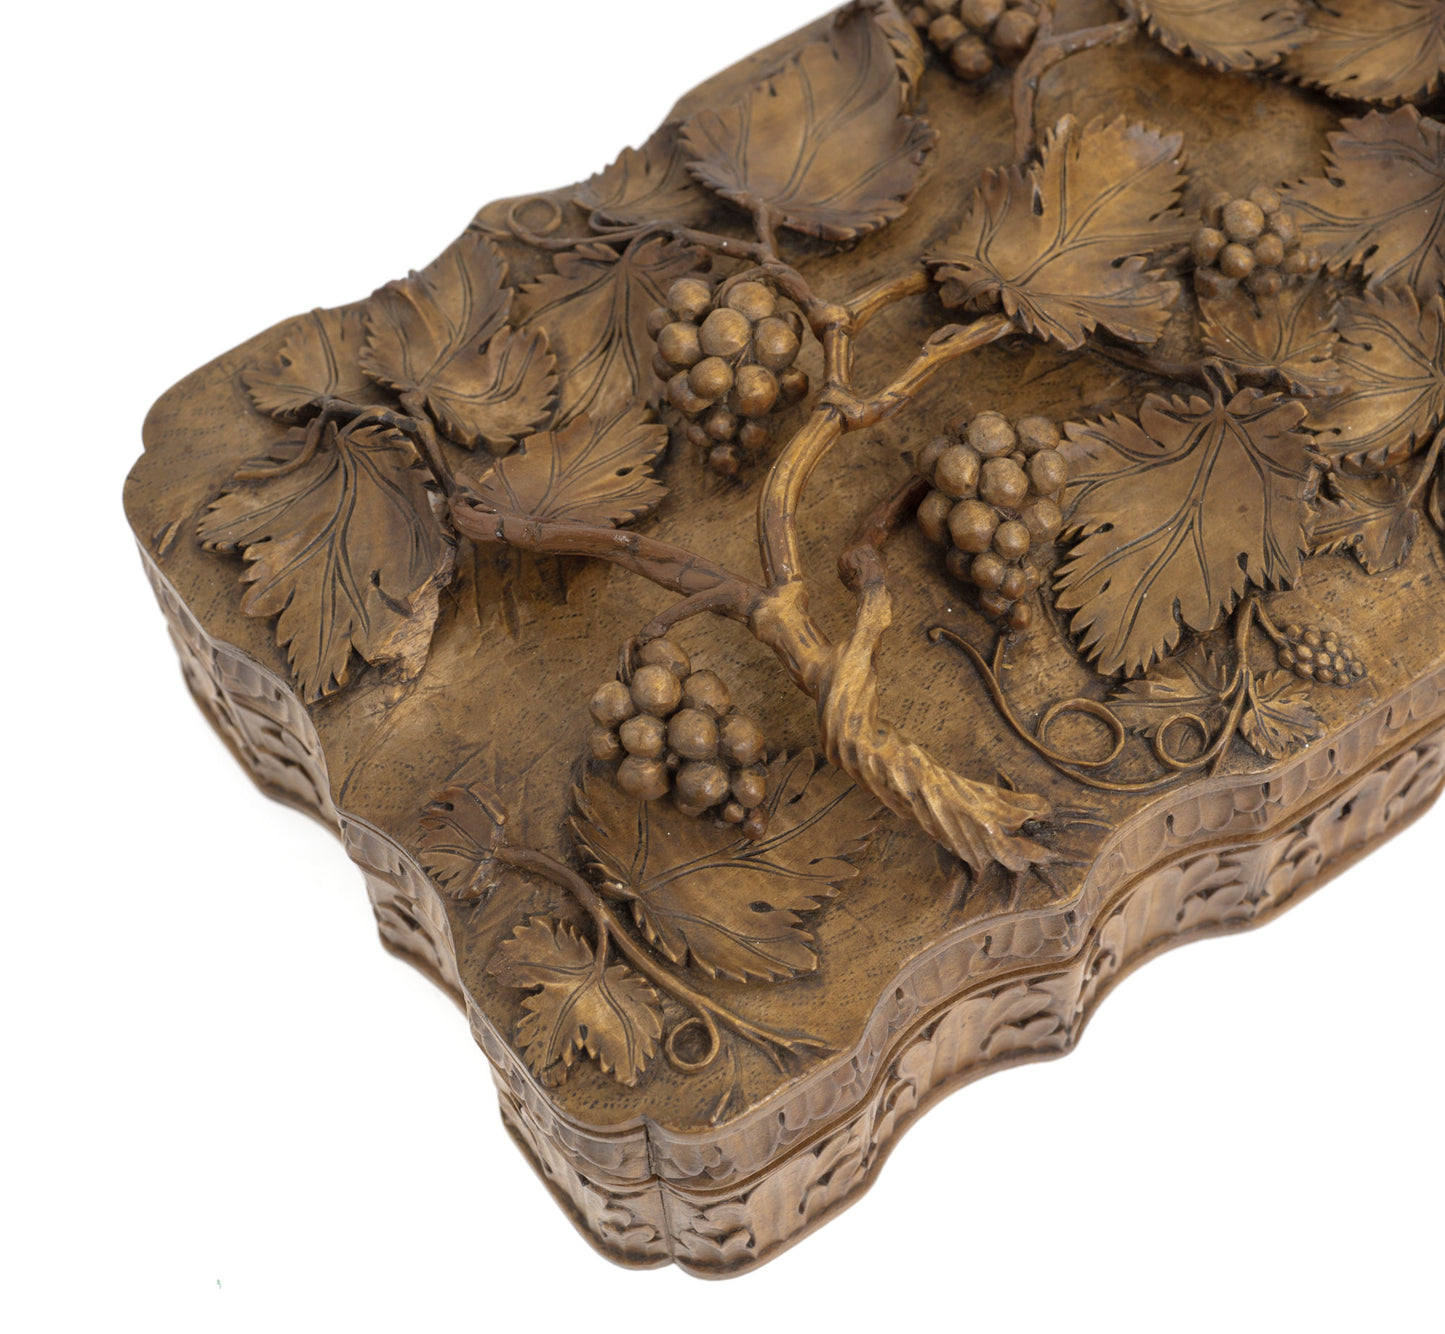 Antique European Alto Relievo Carved Softwood Box - Vines & Grapes - Swiss c1900 (Code 2852)